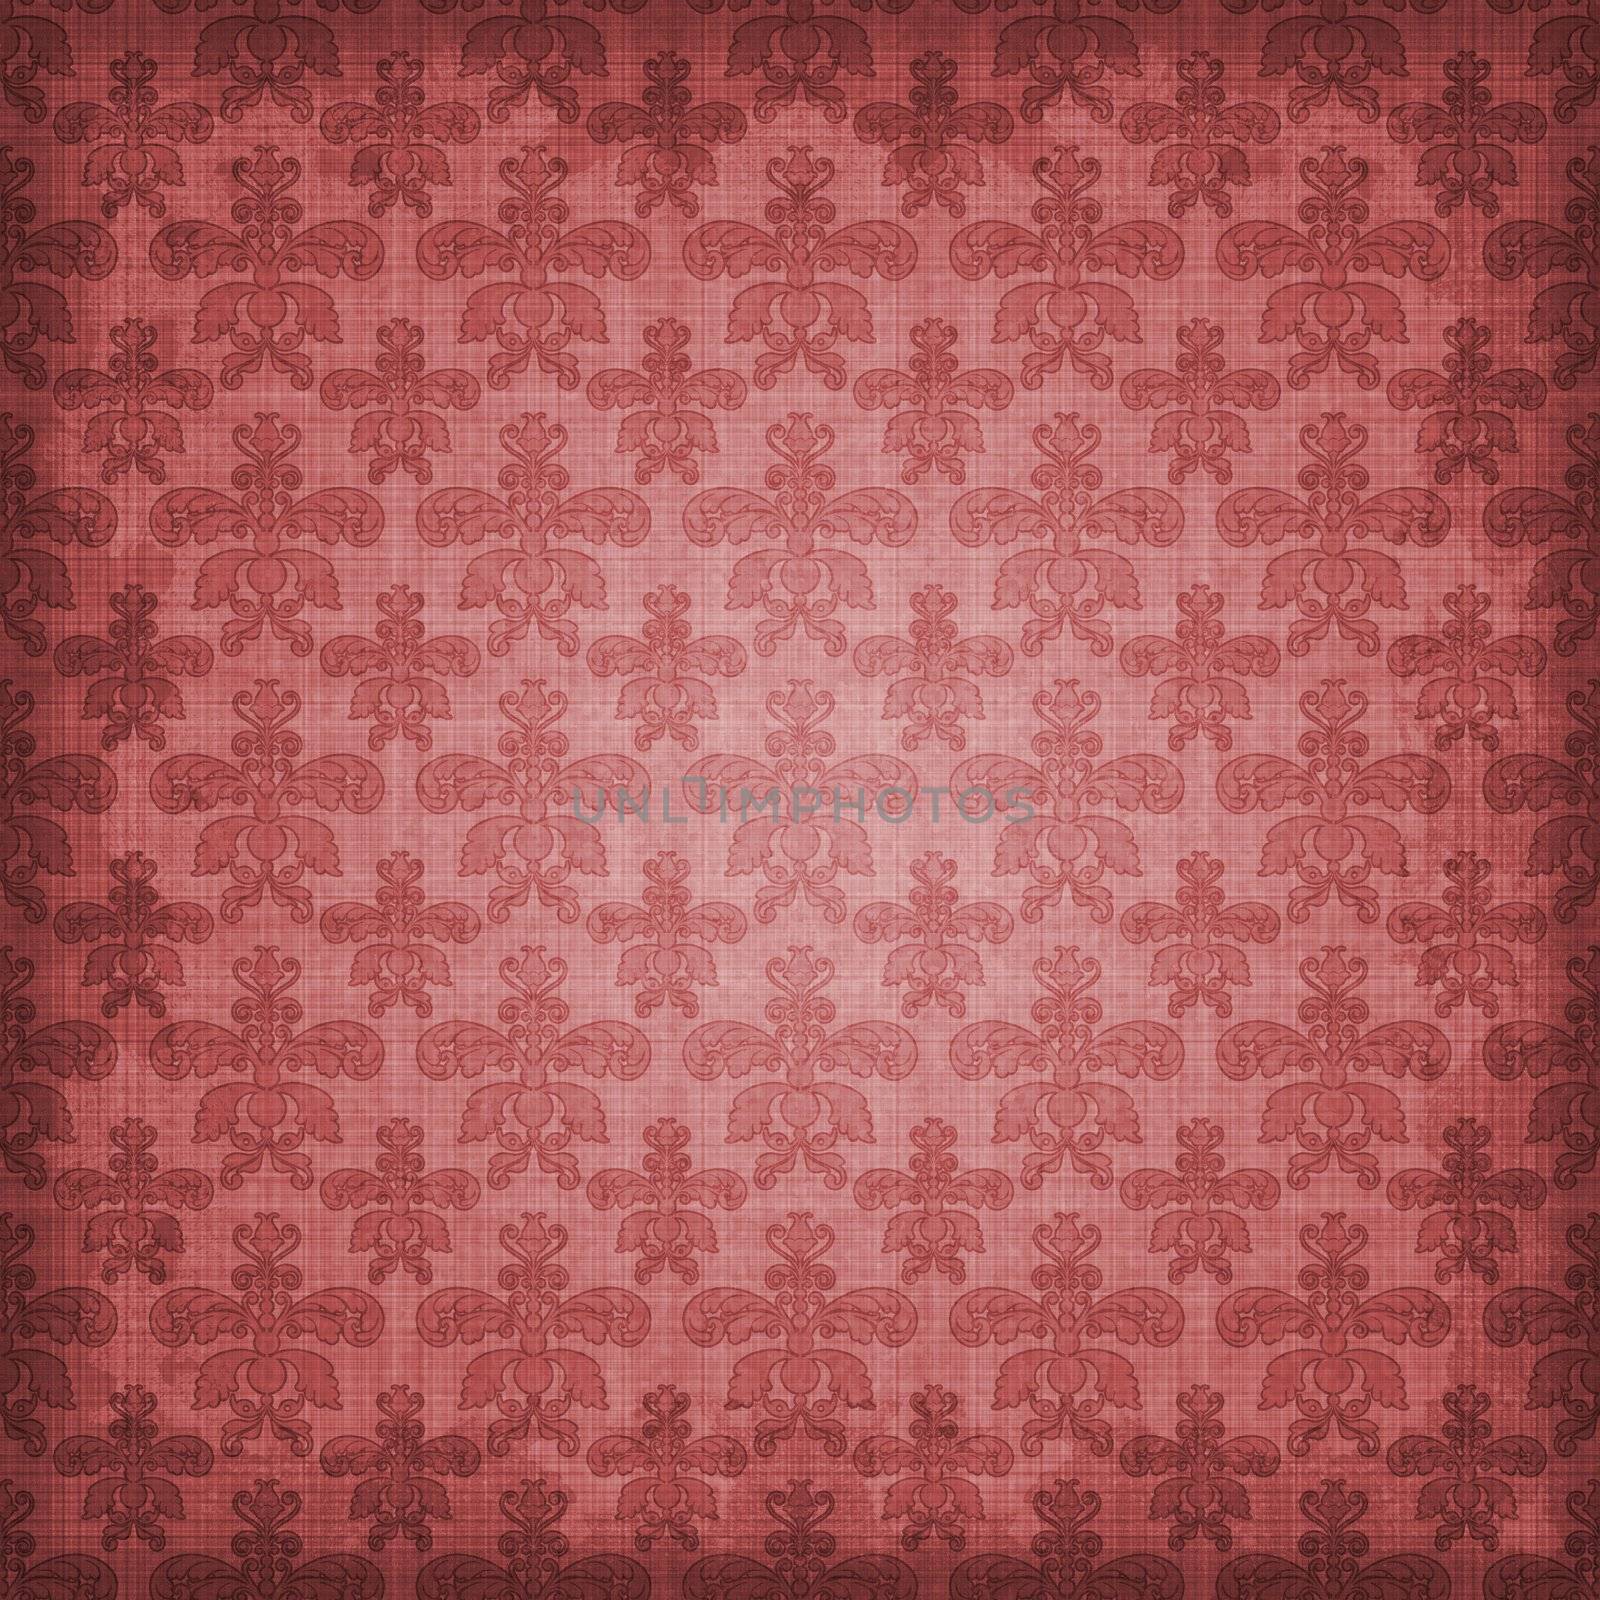 Shaded grungy rosy red to pink damask texture